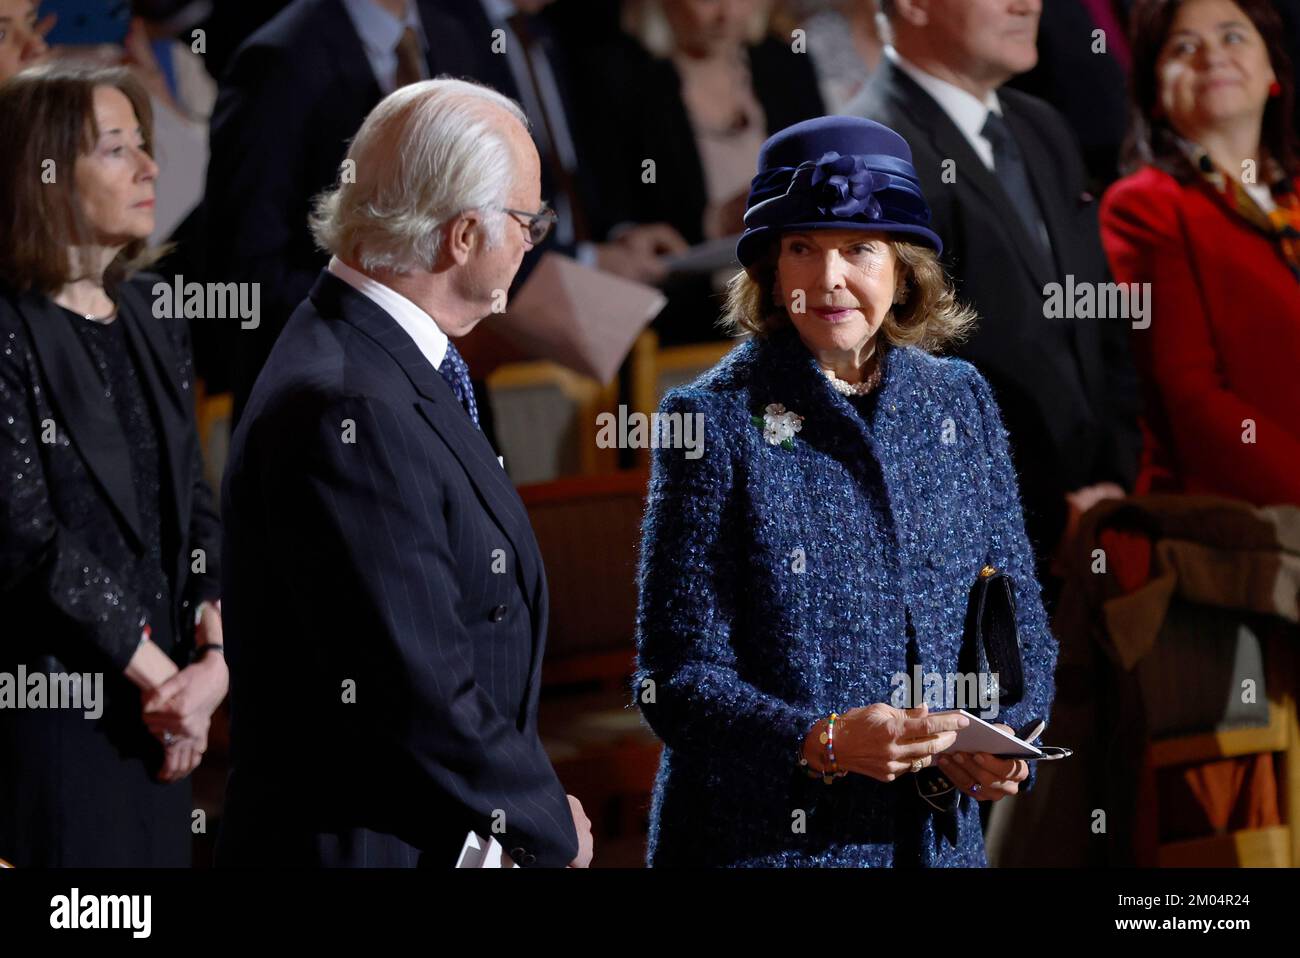 King Carl Gustaf and Queen Silvia during the installation service for the new Archbishop Martin Modéus held at Uppsala Cathedral in Uppsala, Sweden De Stock Photo